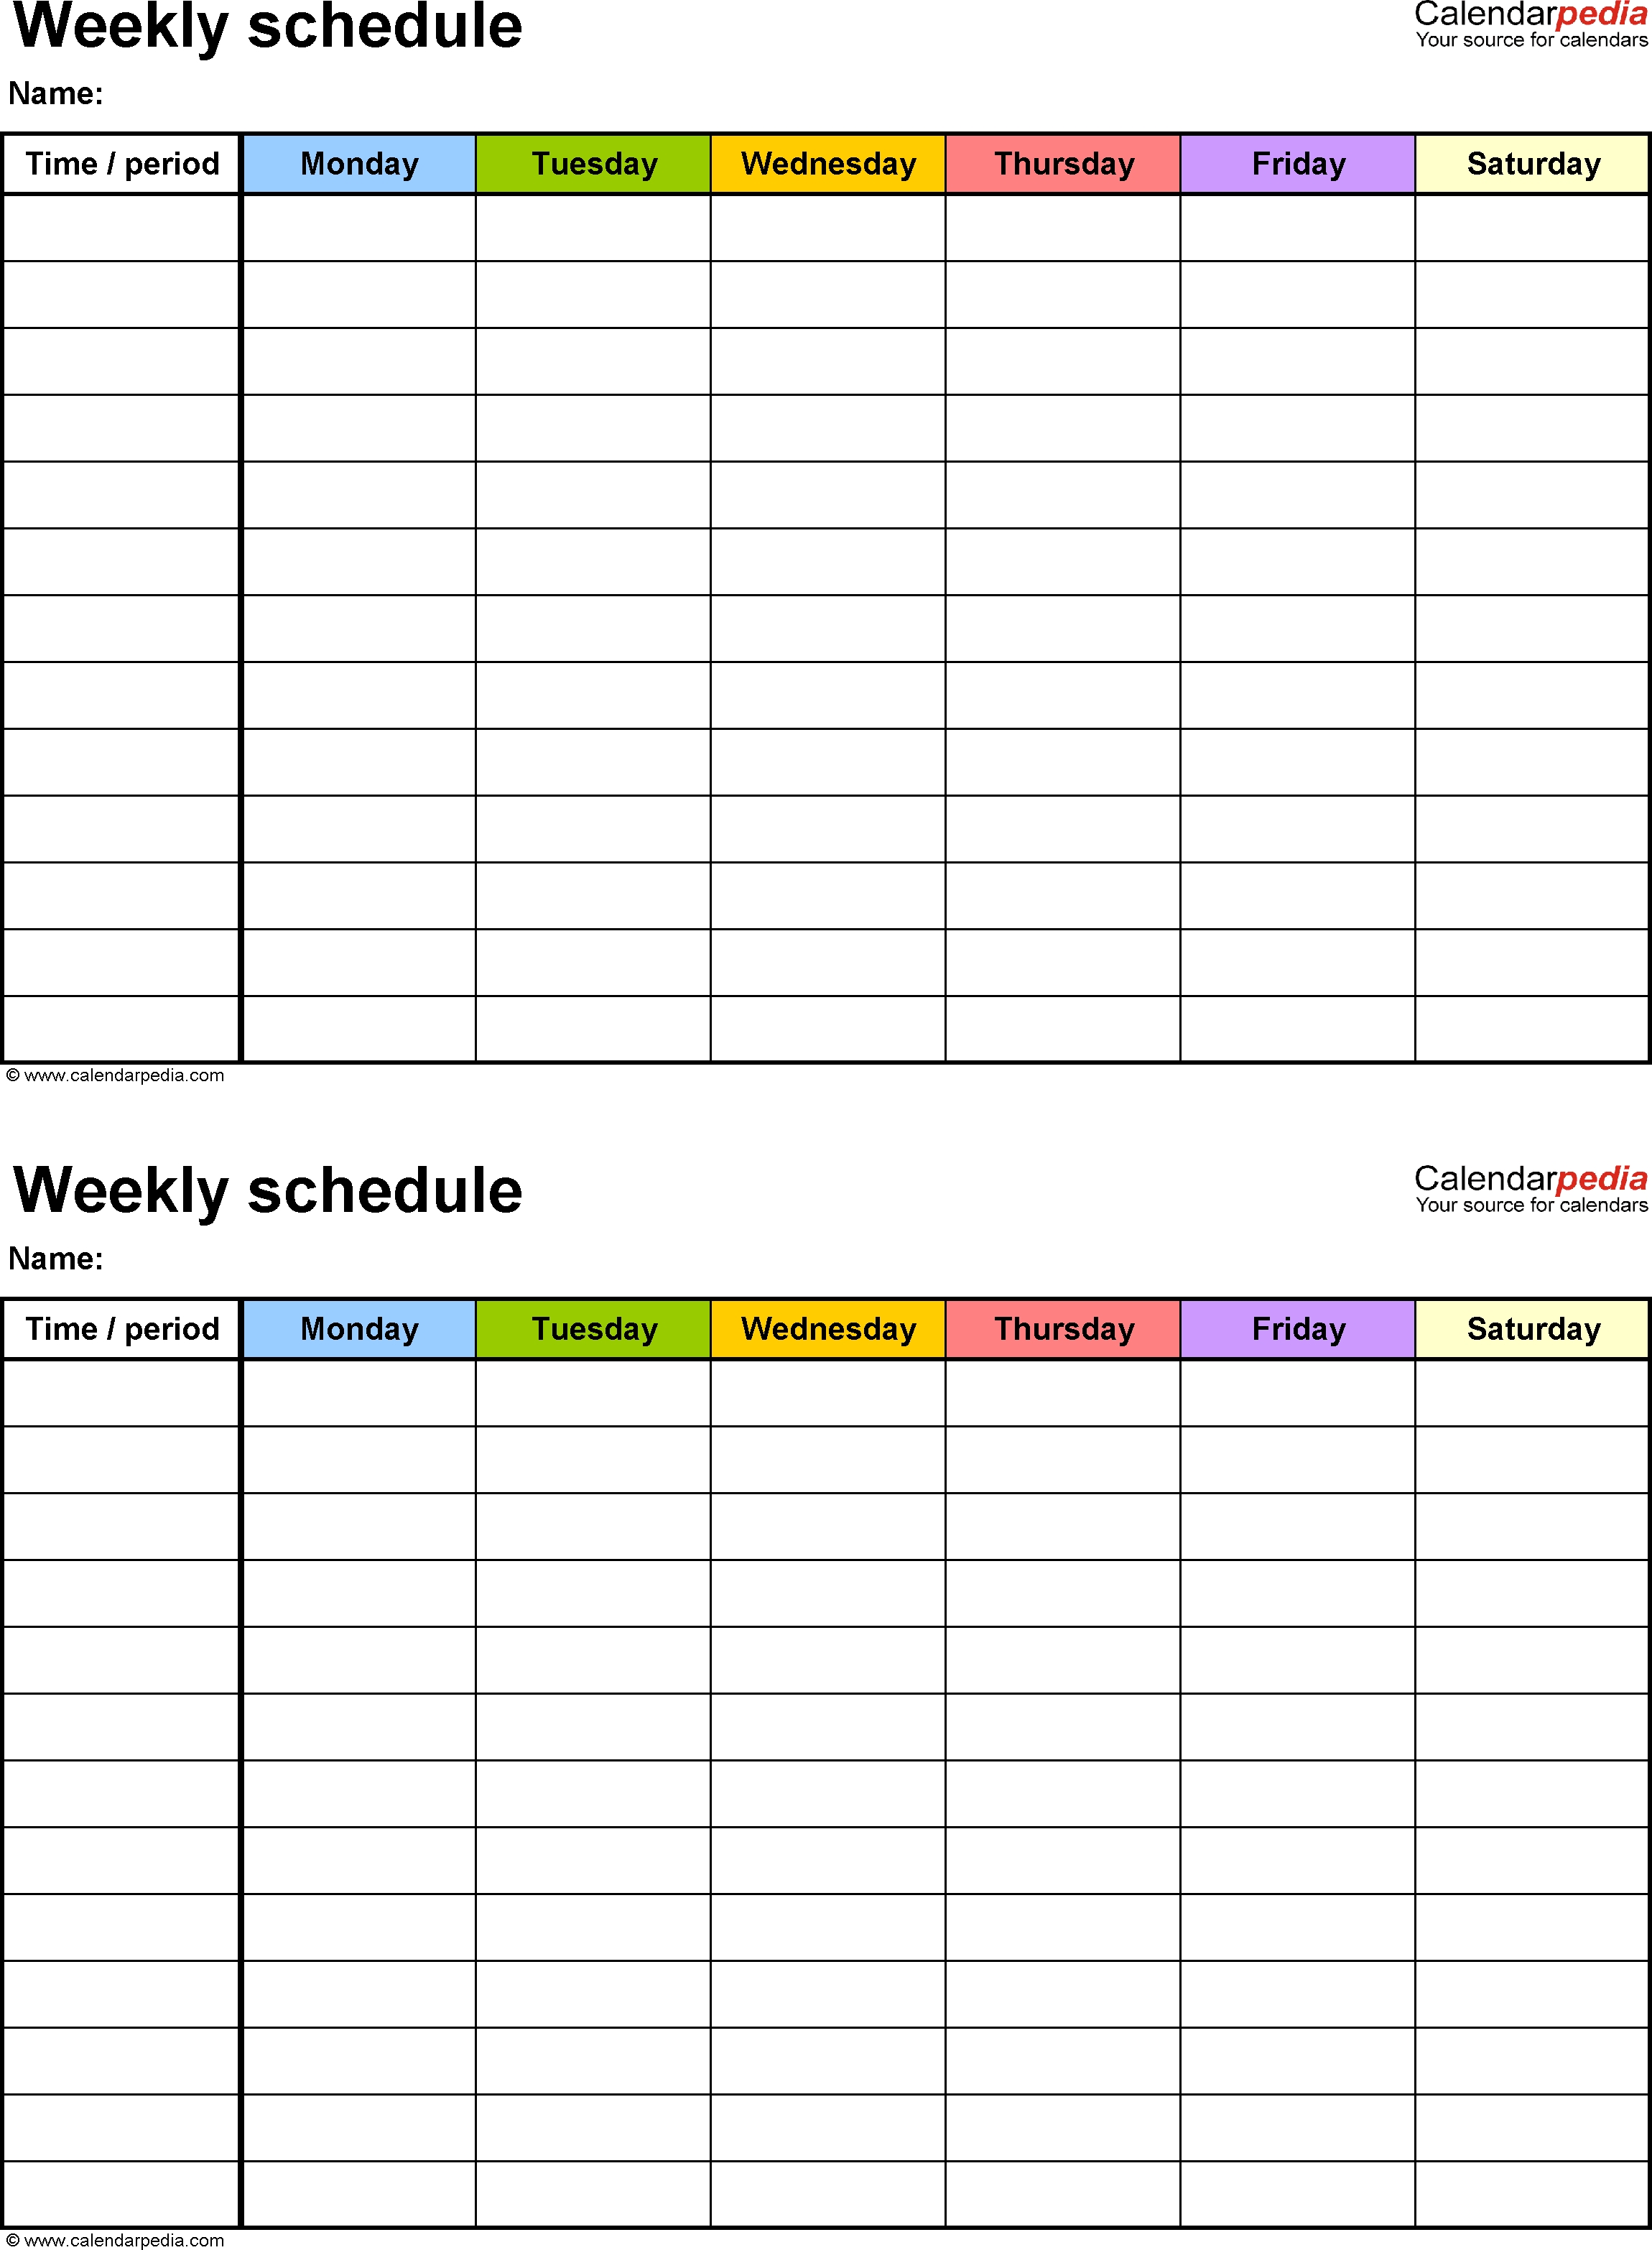 Free Weekly Schedule Templates For Excel - 18 Templates  Free One Month Schedule Templates